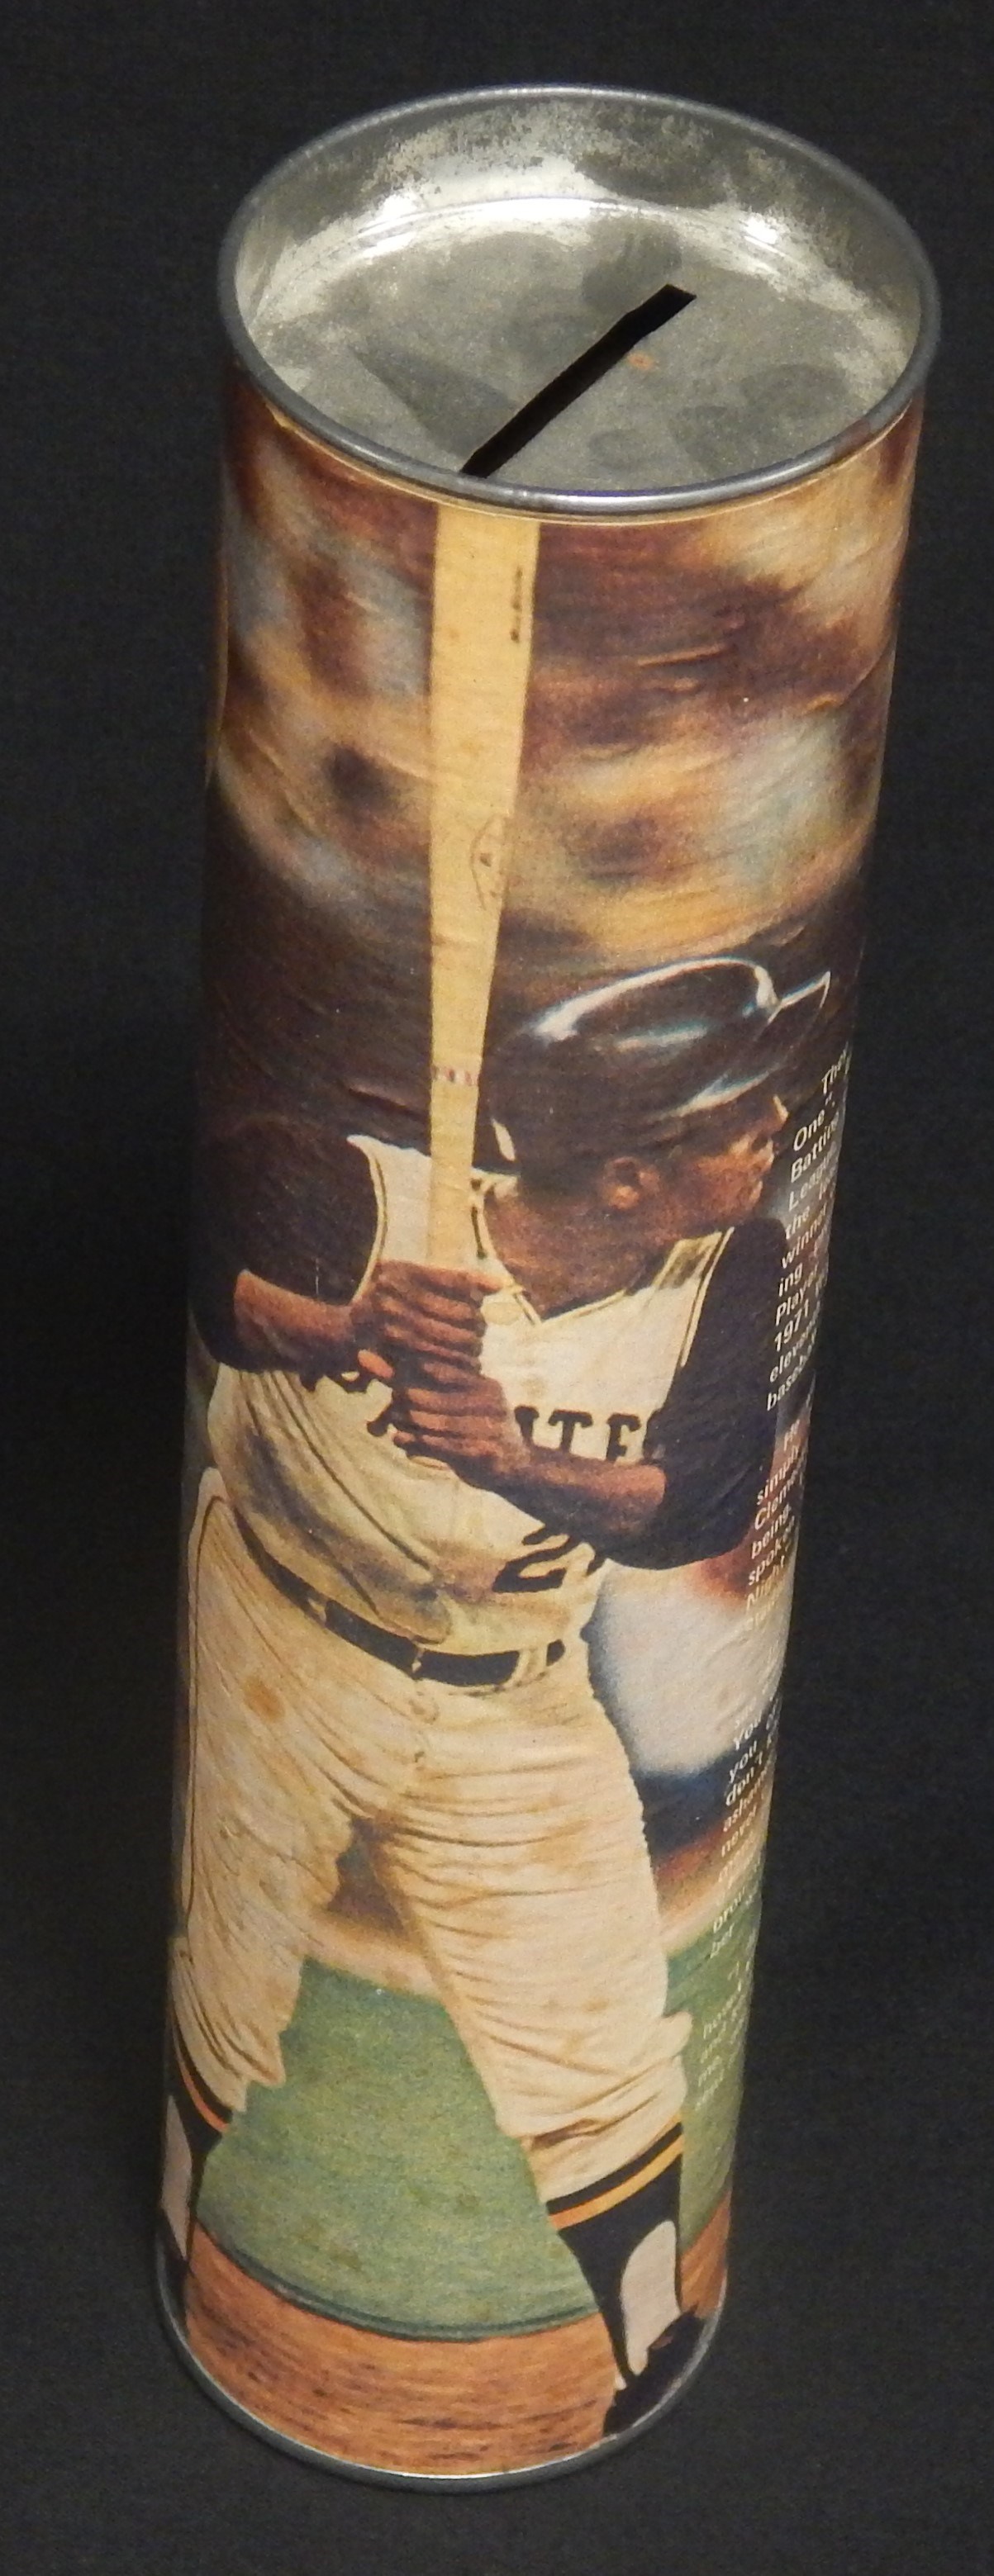 Clemente and Pittsburgh Pirates - Extremely Rare 1972 Roberto Clemente Candy Bank